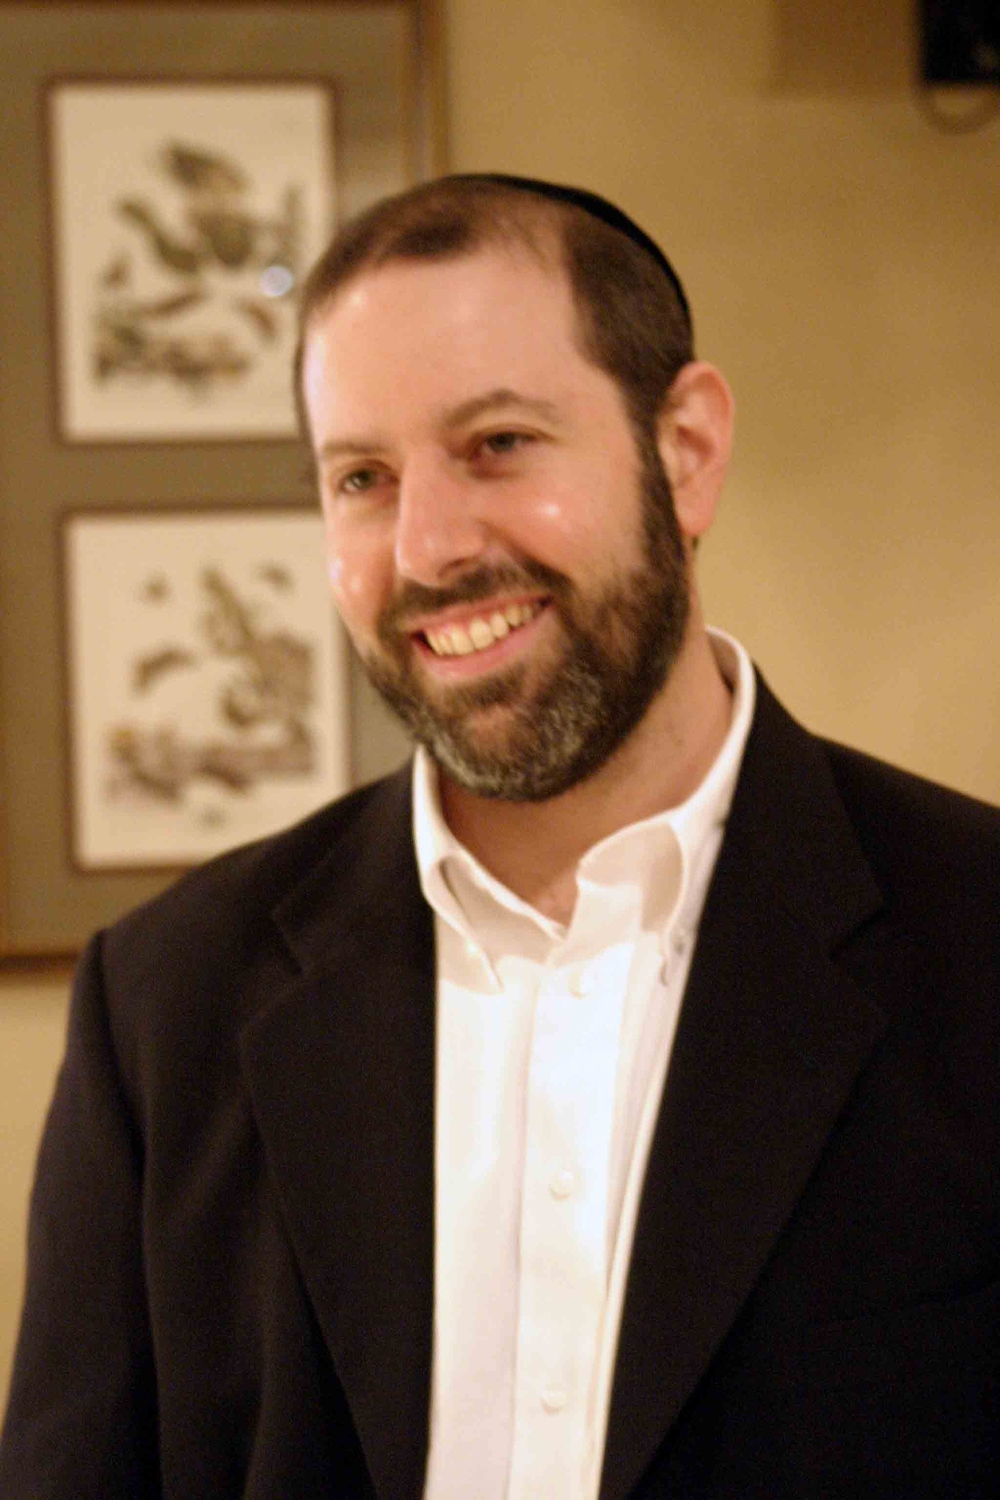 Rabbi David Rudolph (PhD, Cambridge University) was born and raised in the Greater Washington, D.C. area where he attended Congregation Beth El, ... - DavidRudolphpic